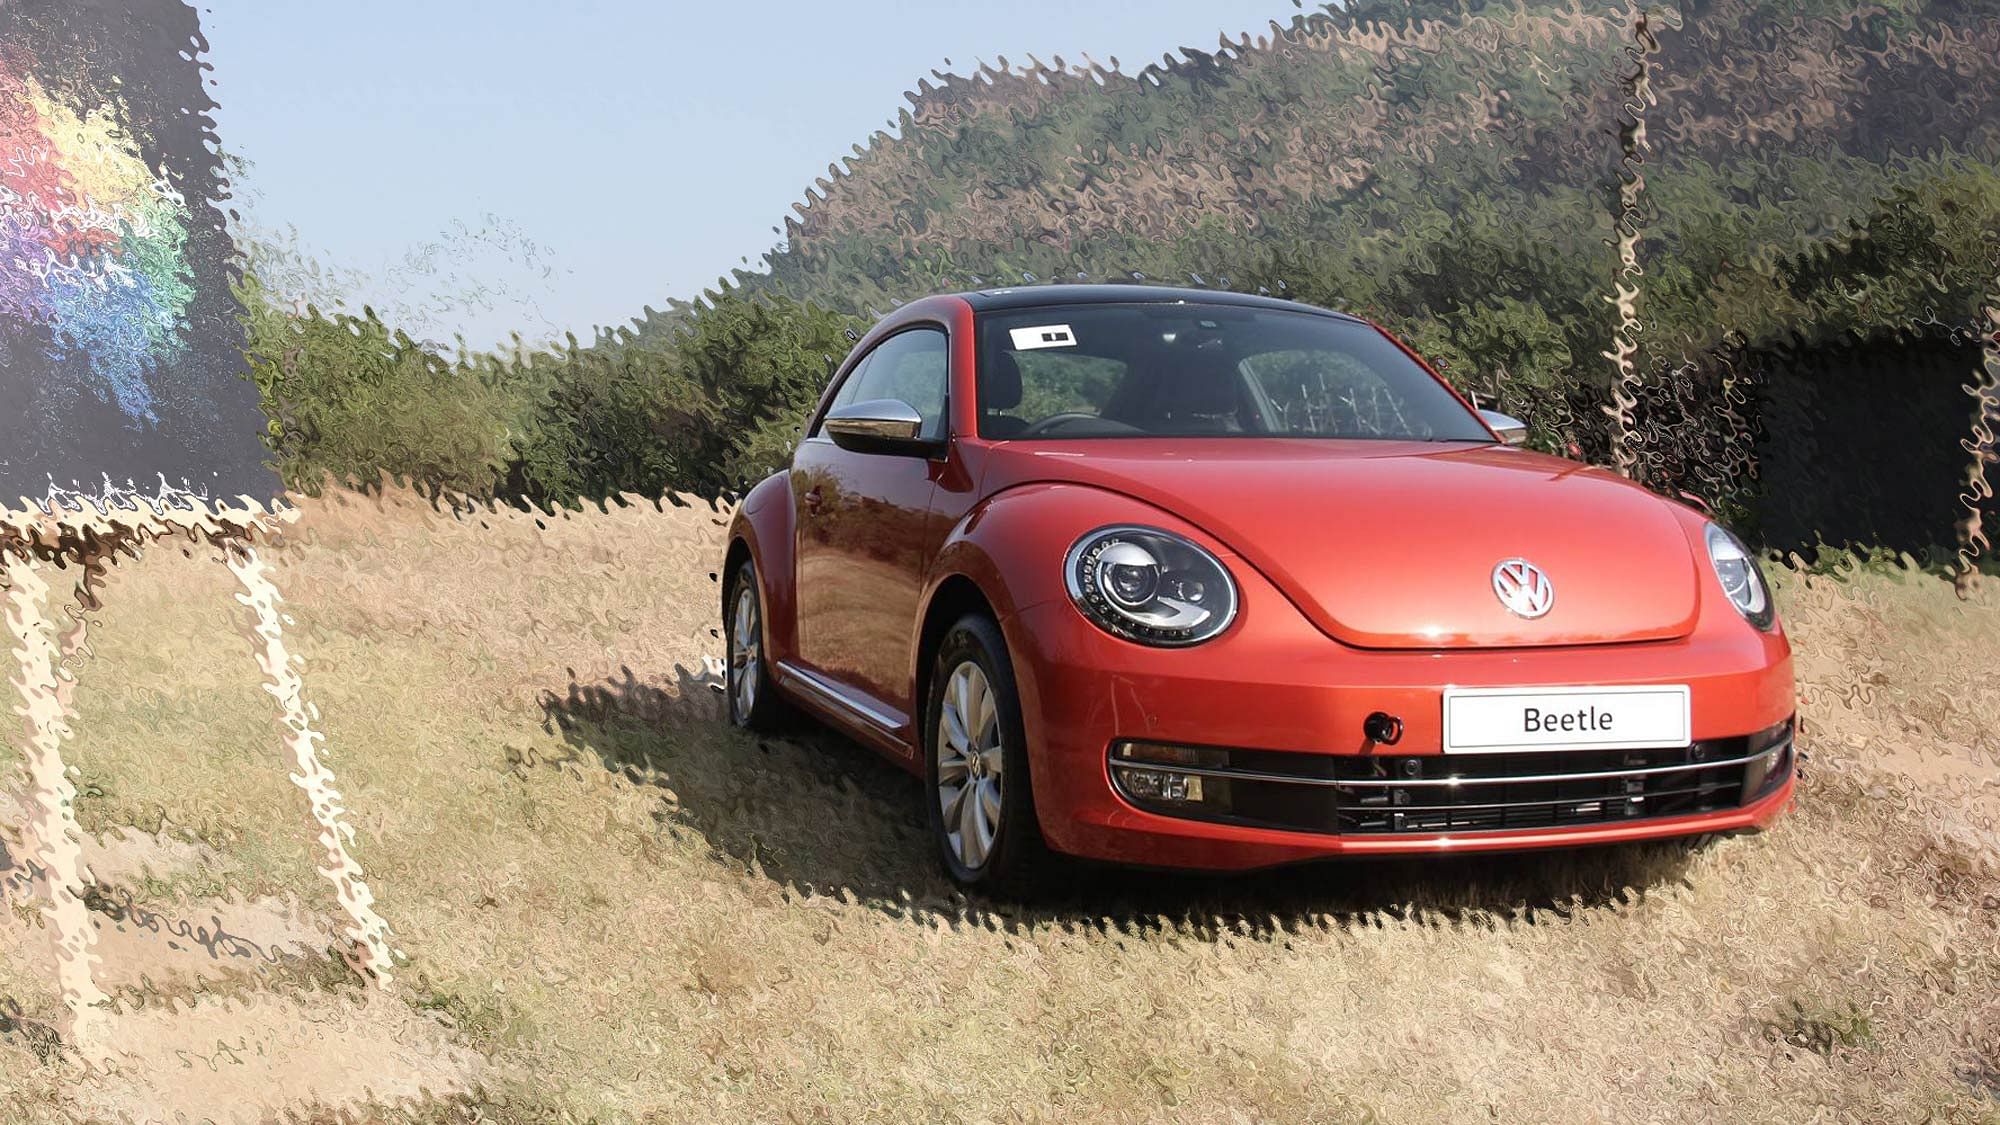 Volkswagen Beetle. (Photo: Facebook/<a href="https://www.facebook.com/Volkswagenindia/timeline">Volkswagen</a>/altered by <b>The Quint</b>)